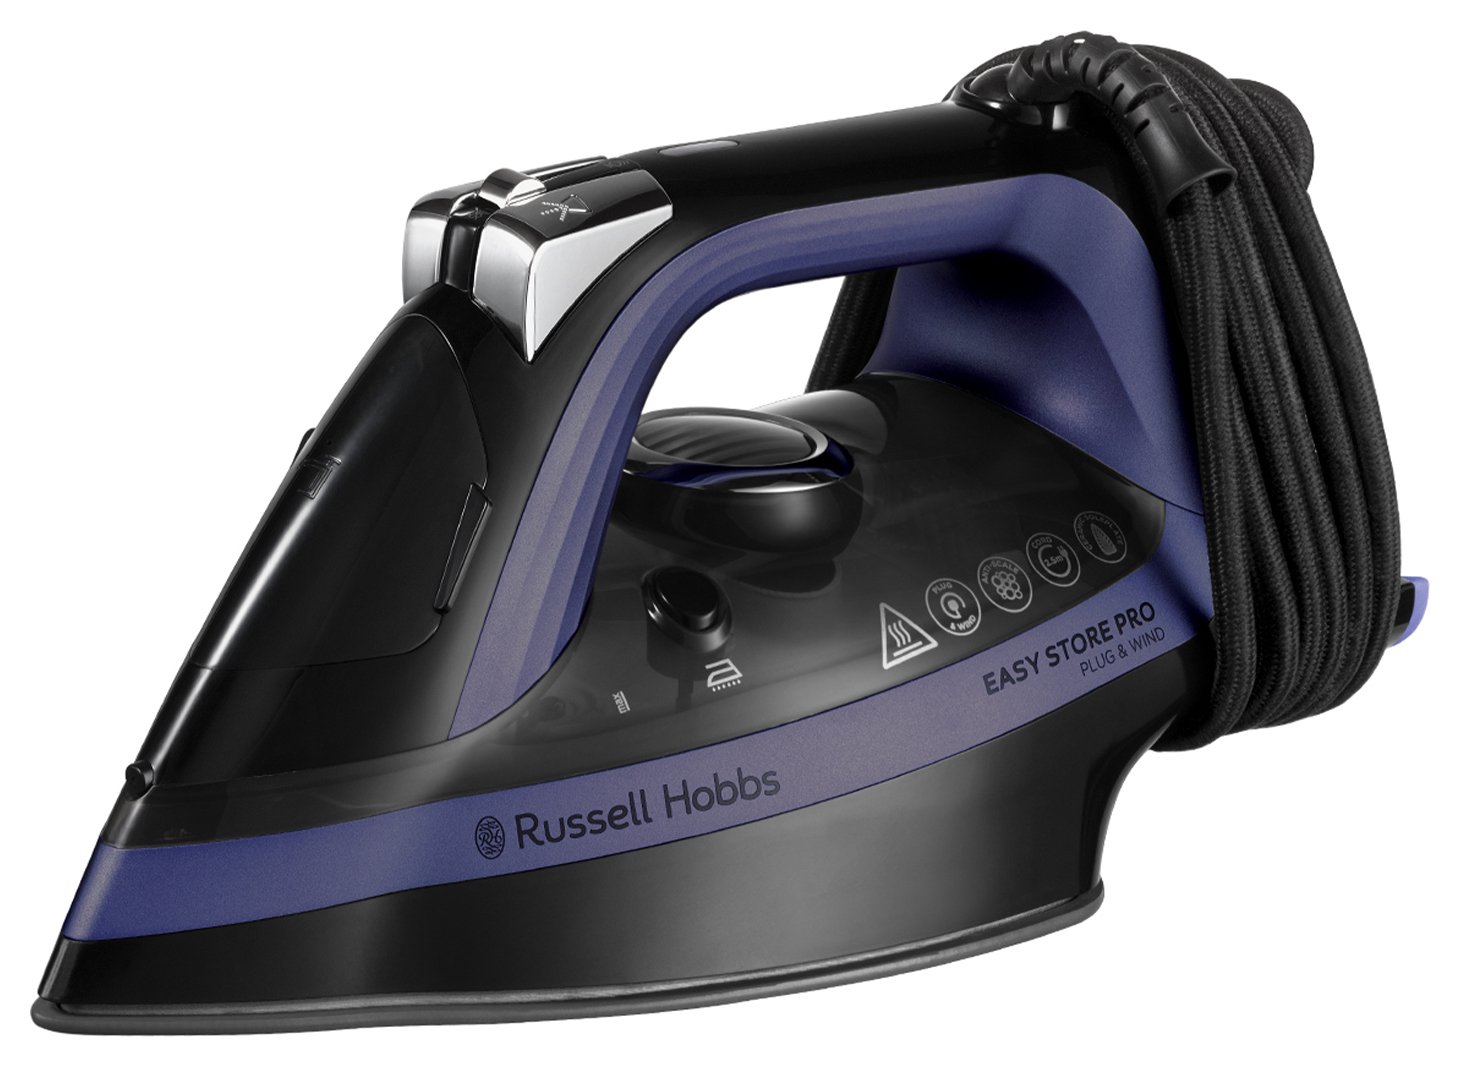 Russell Hobbs Easy Store Pro Plug and Wind Steam Iron 26731